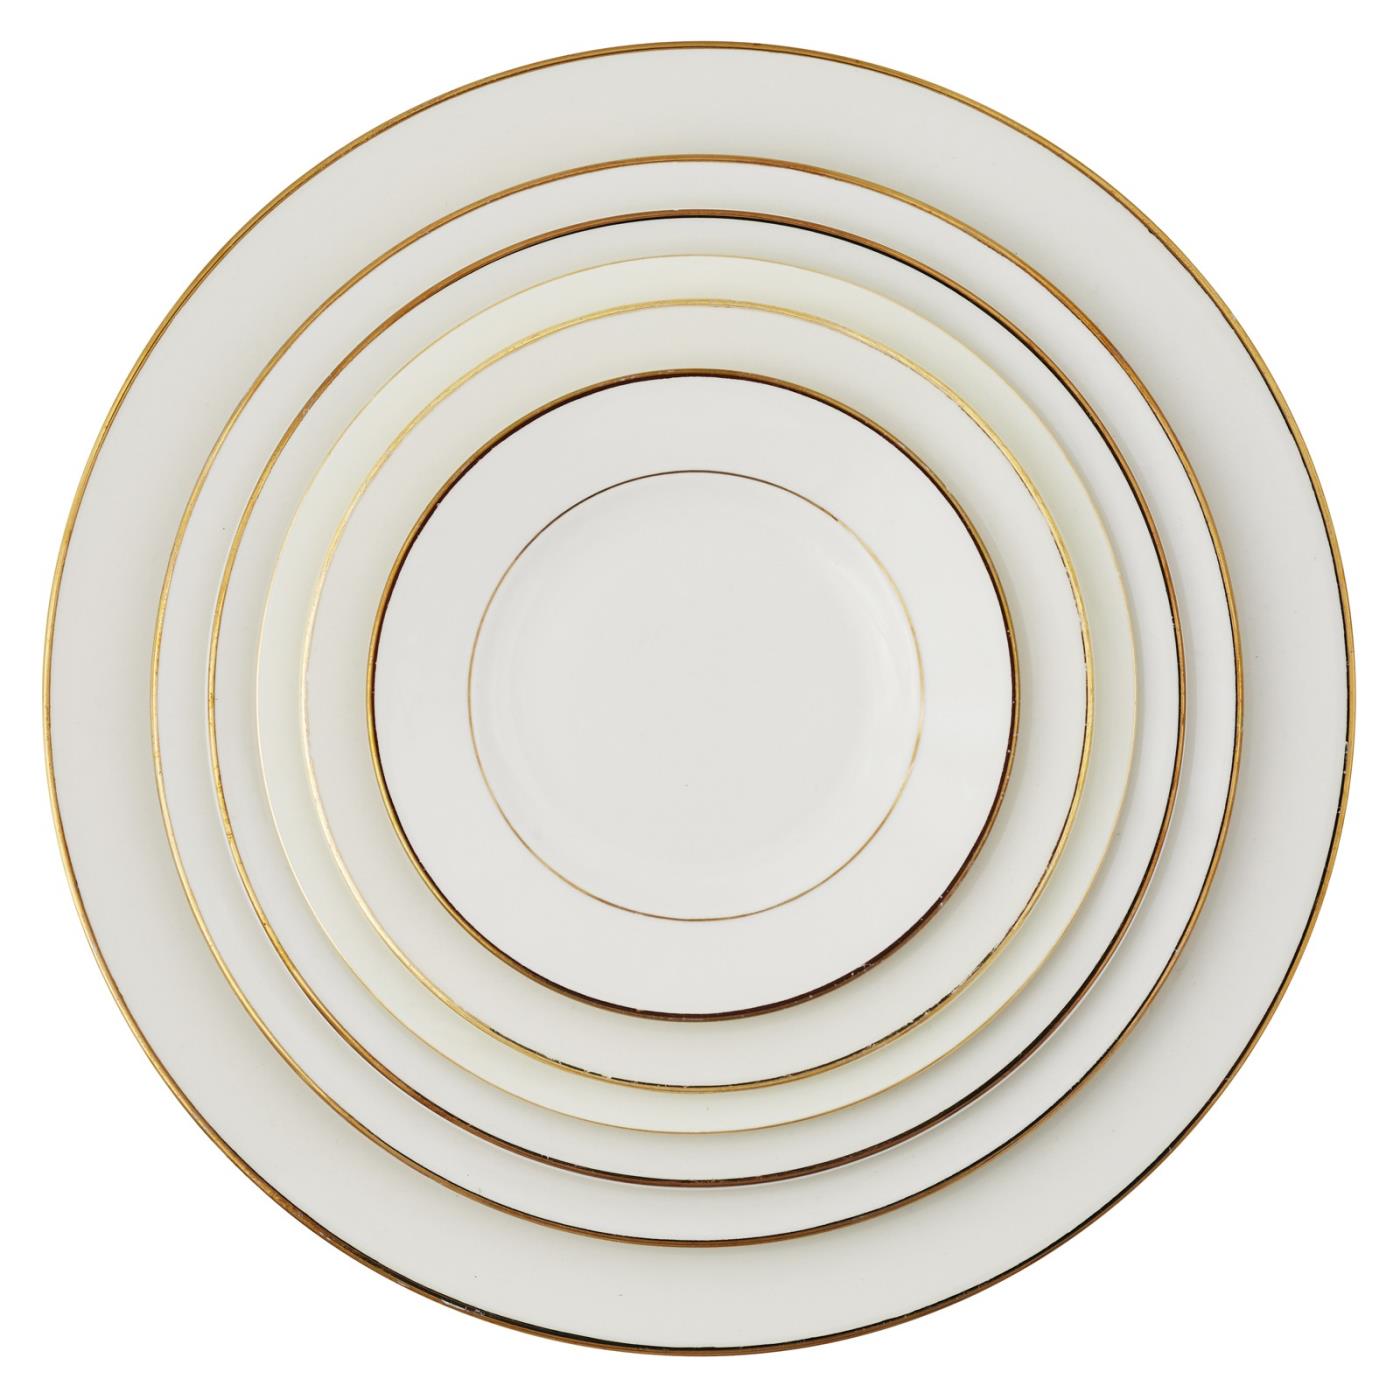 Ecru with Gold Rim Plate Collection